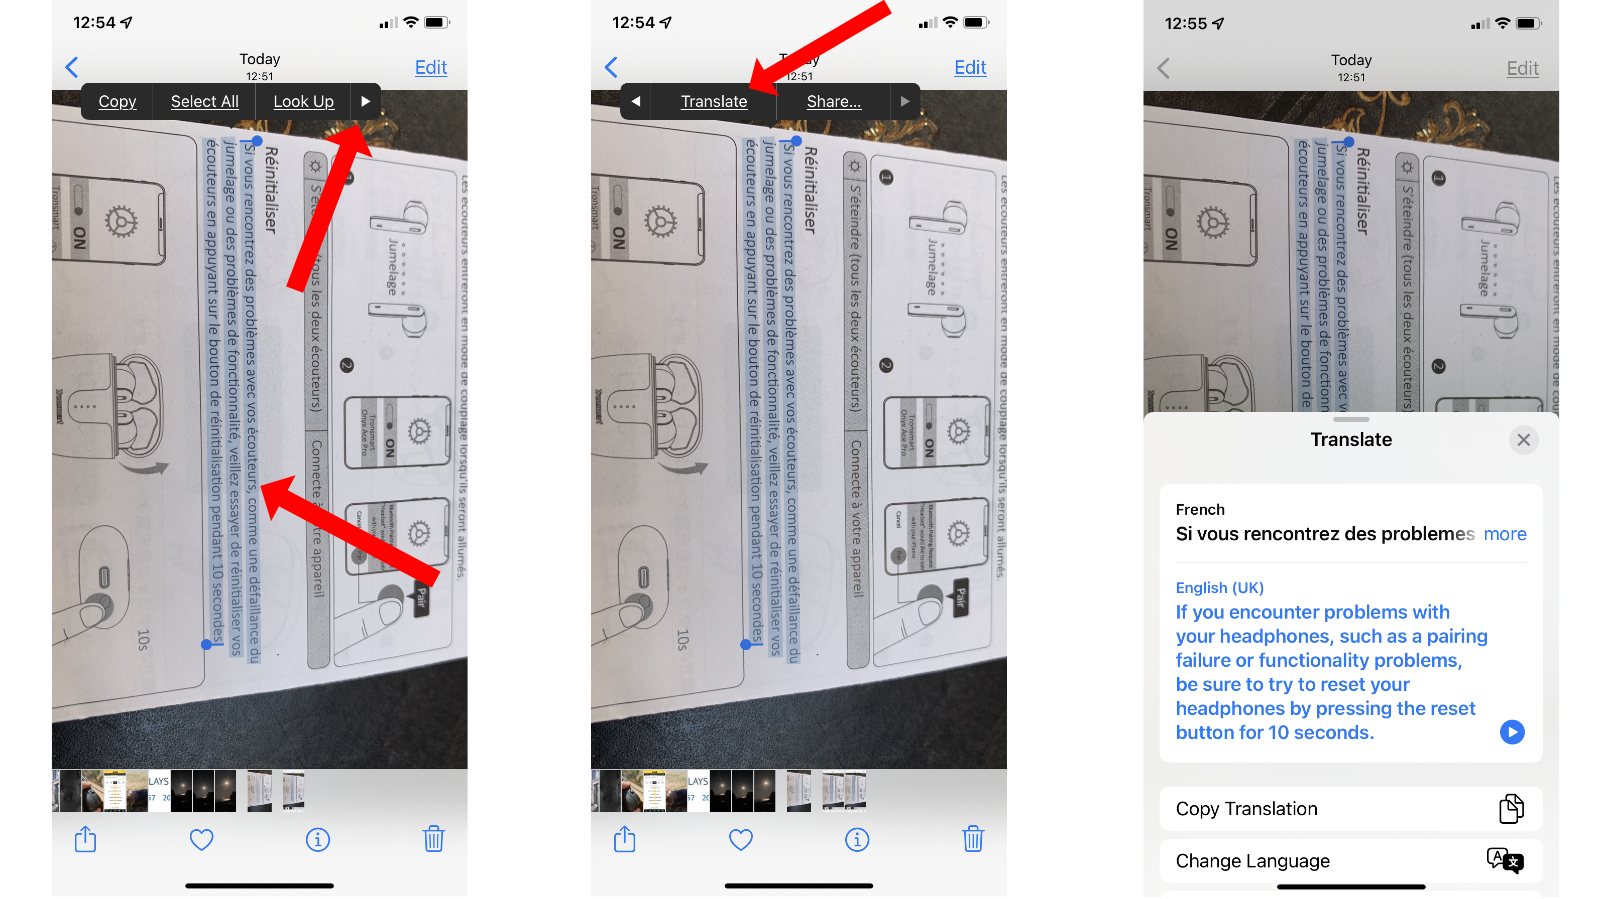 How to translate text on a photo on iPhone